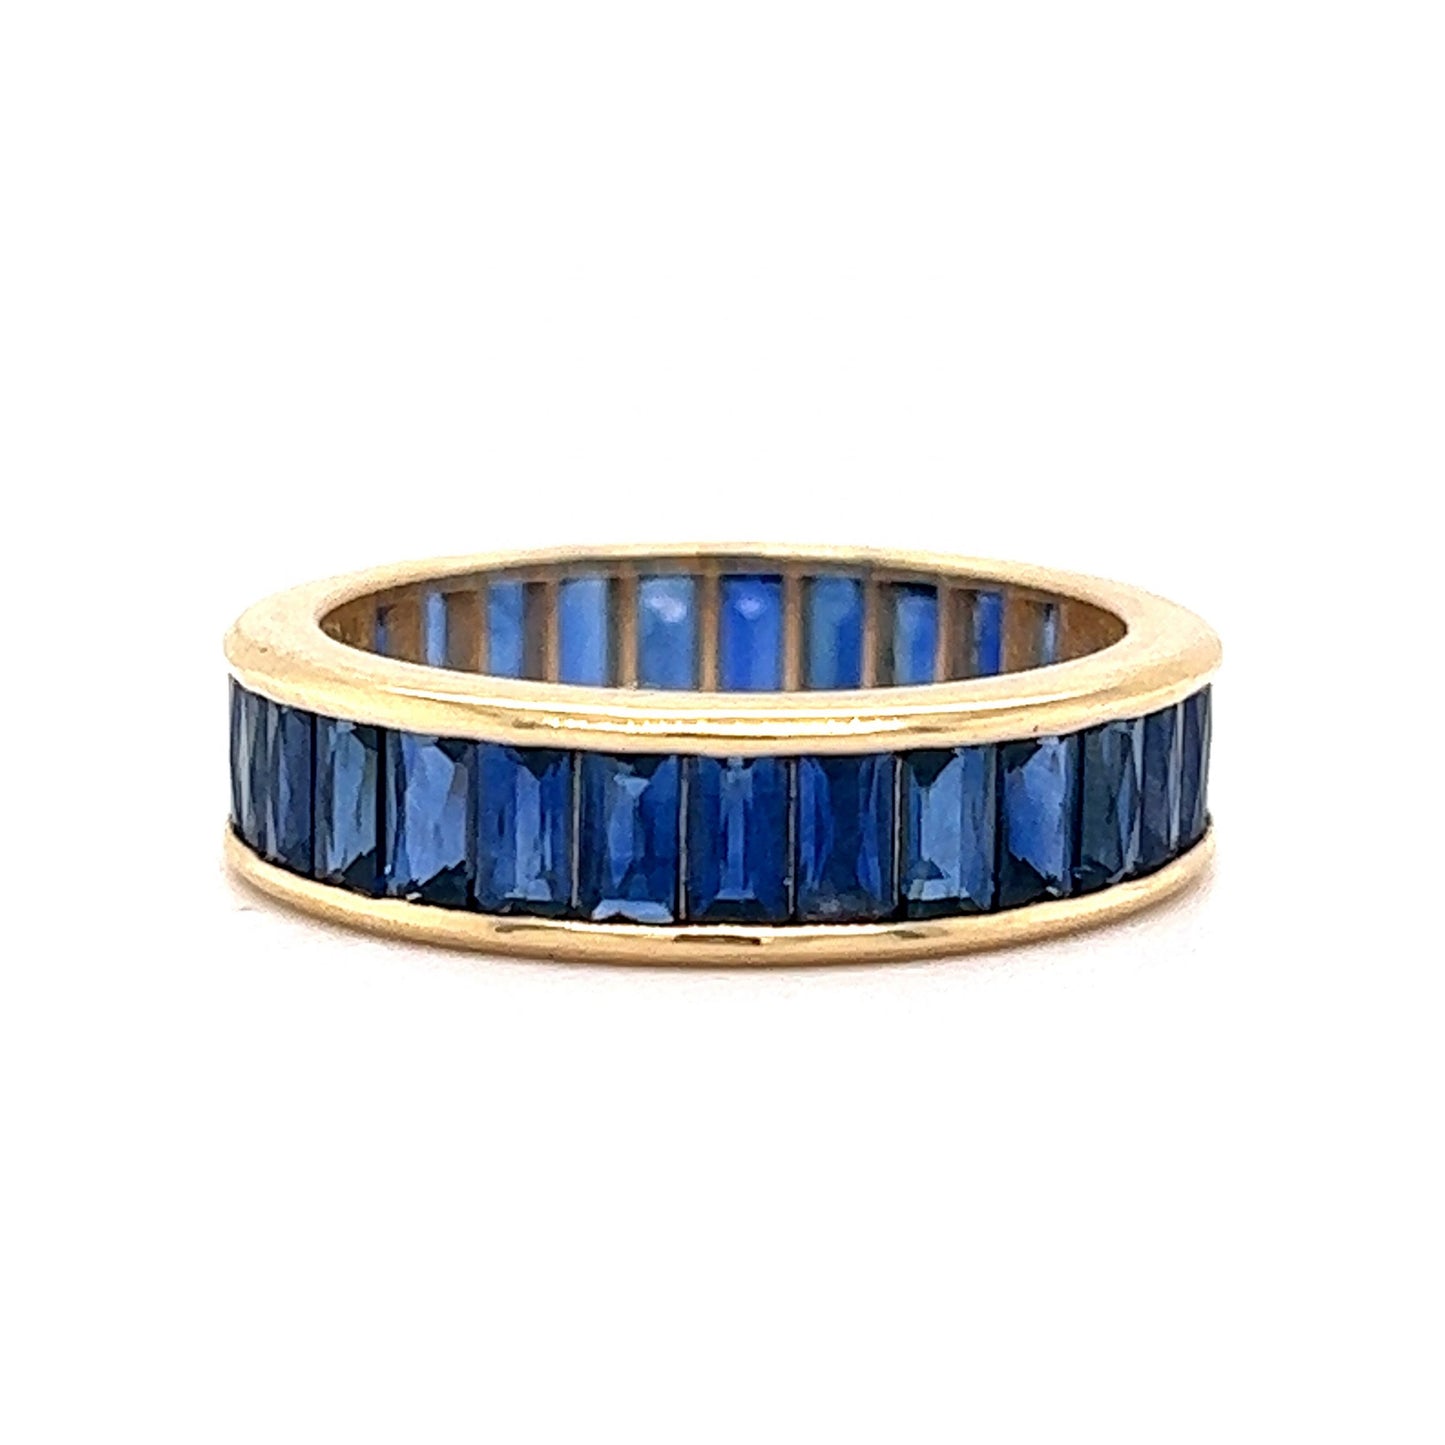 French Cut Sapphire Eternity Band in 18k Yellow Gold